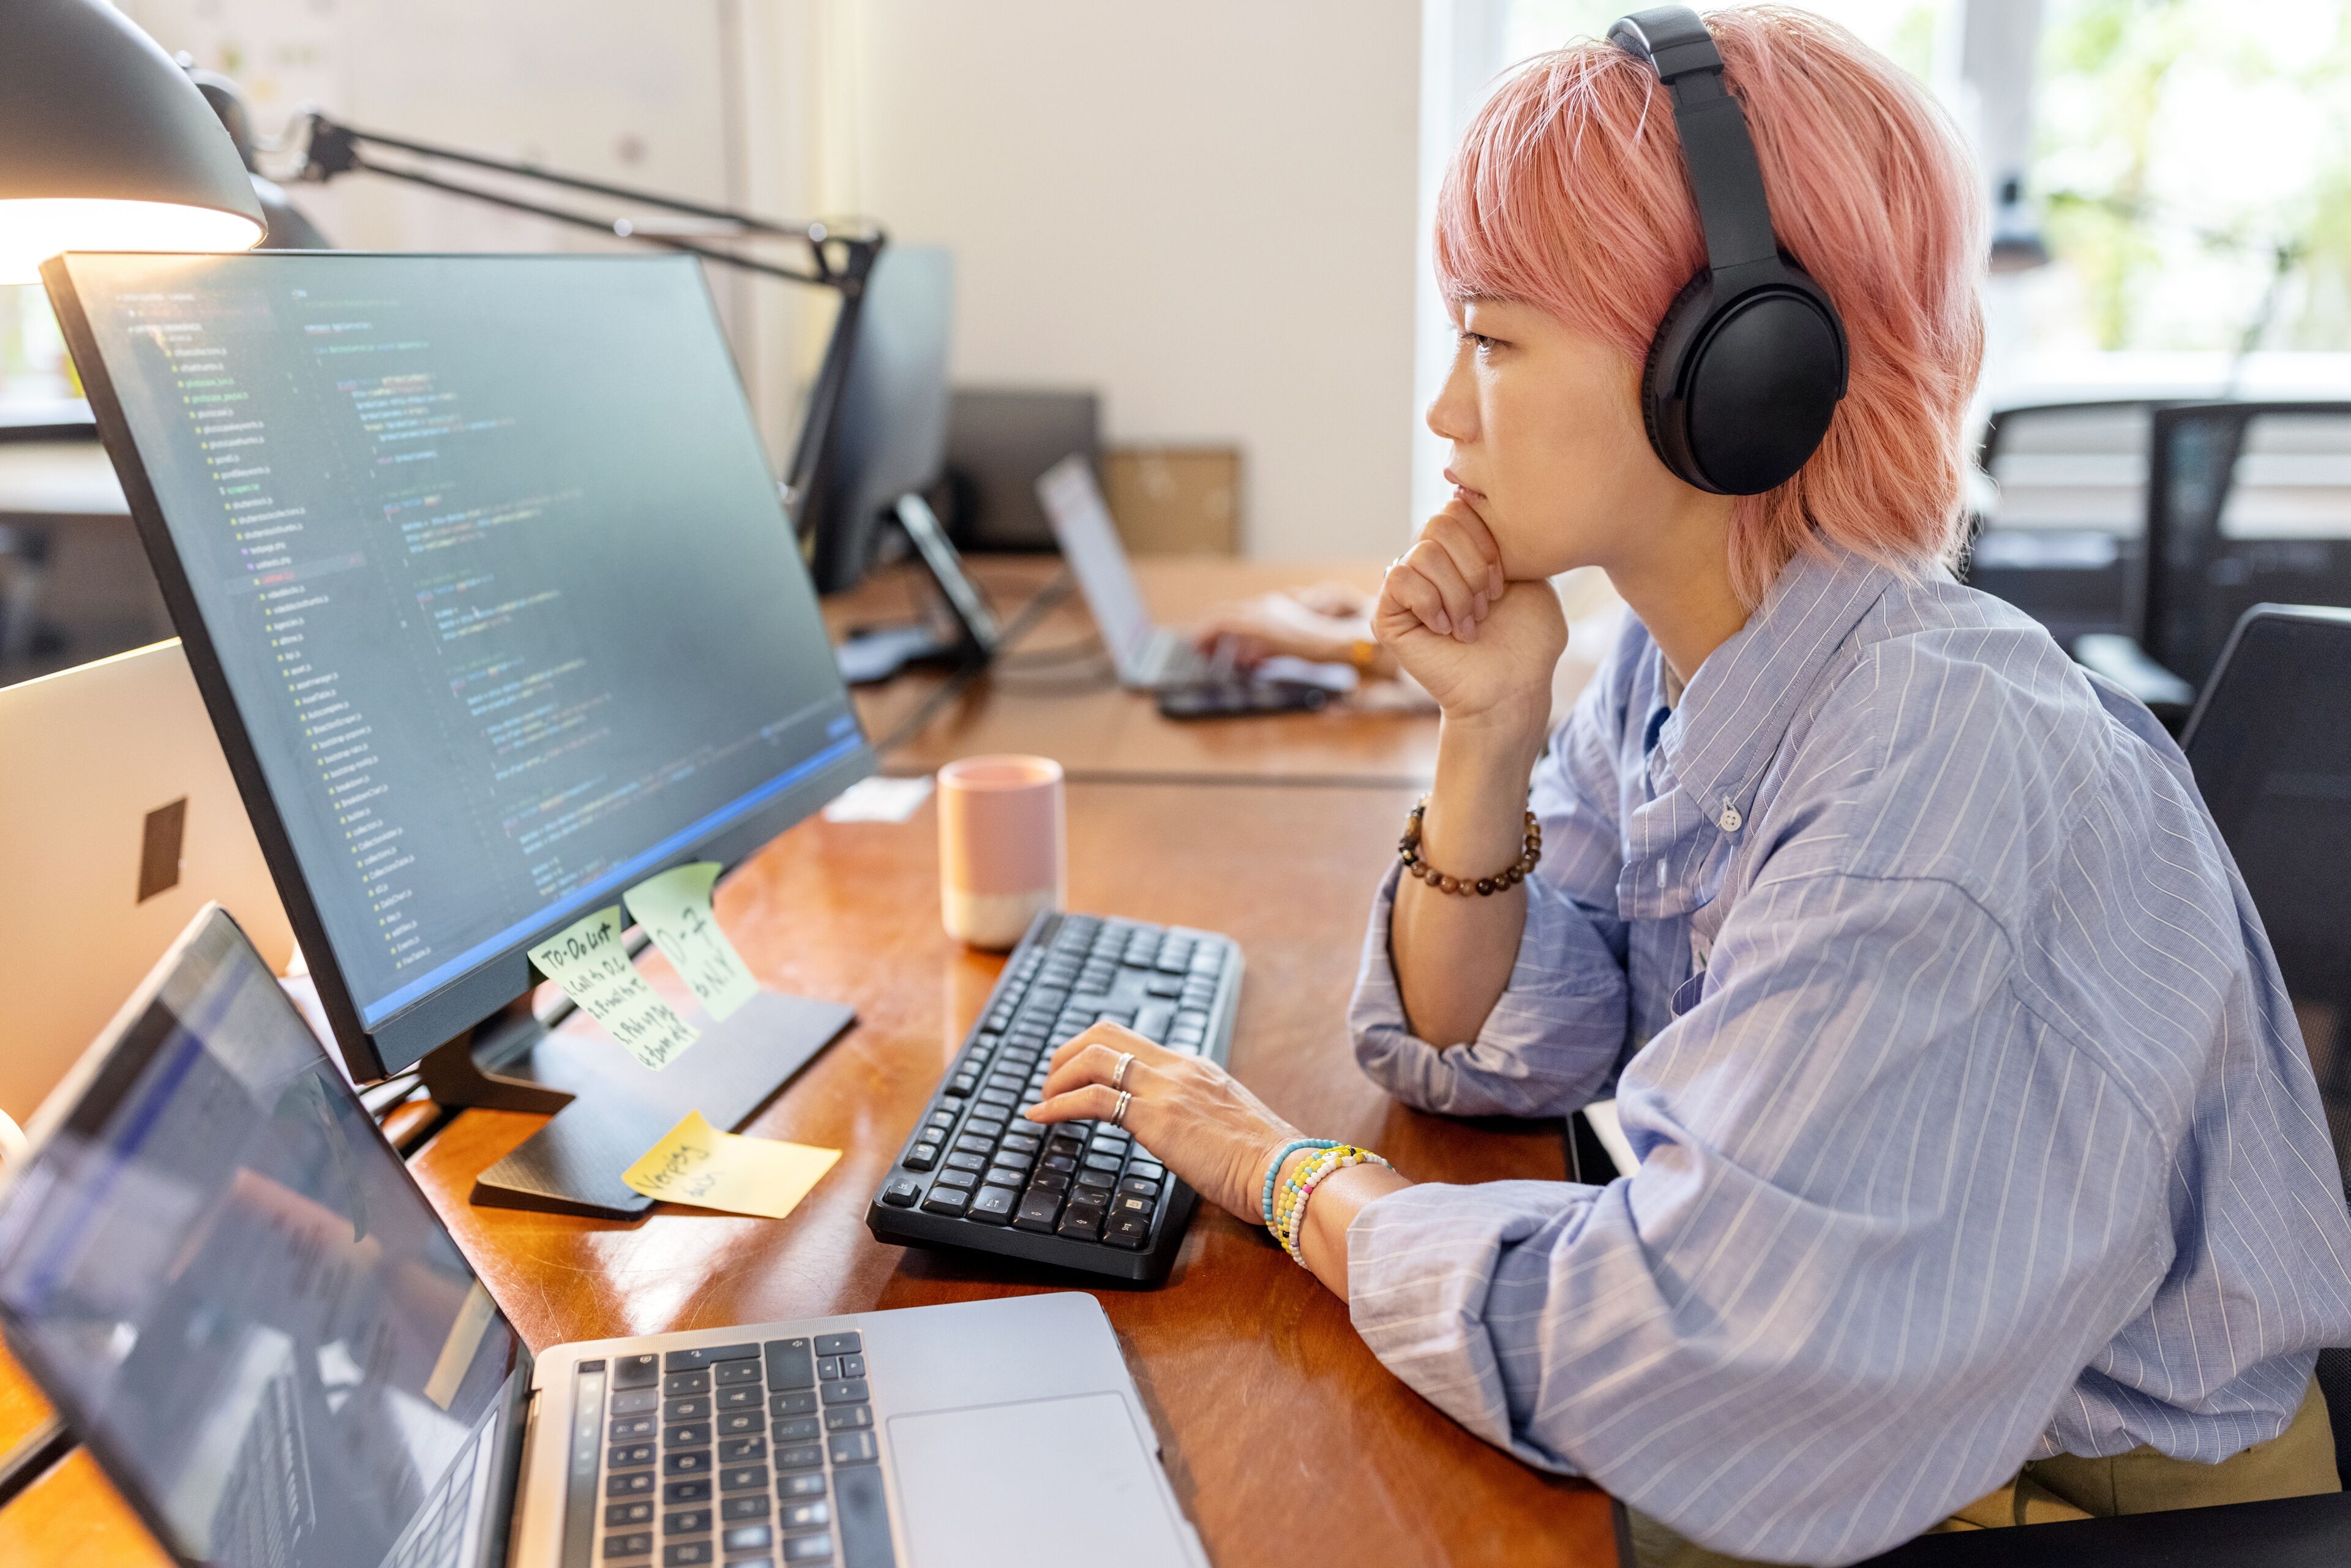 A focused individual with pink hair, wearing headphones, codes on a computer in a well-lit office.